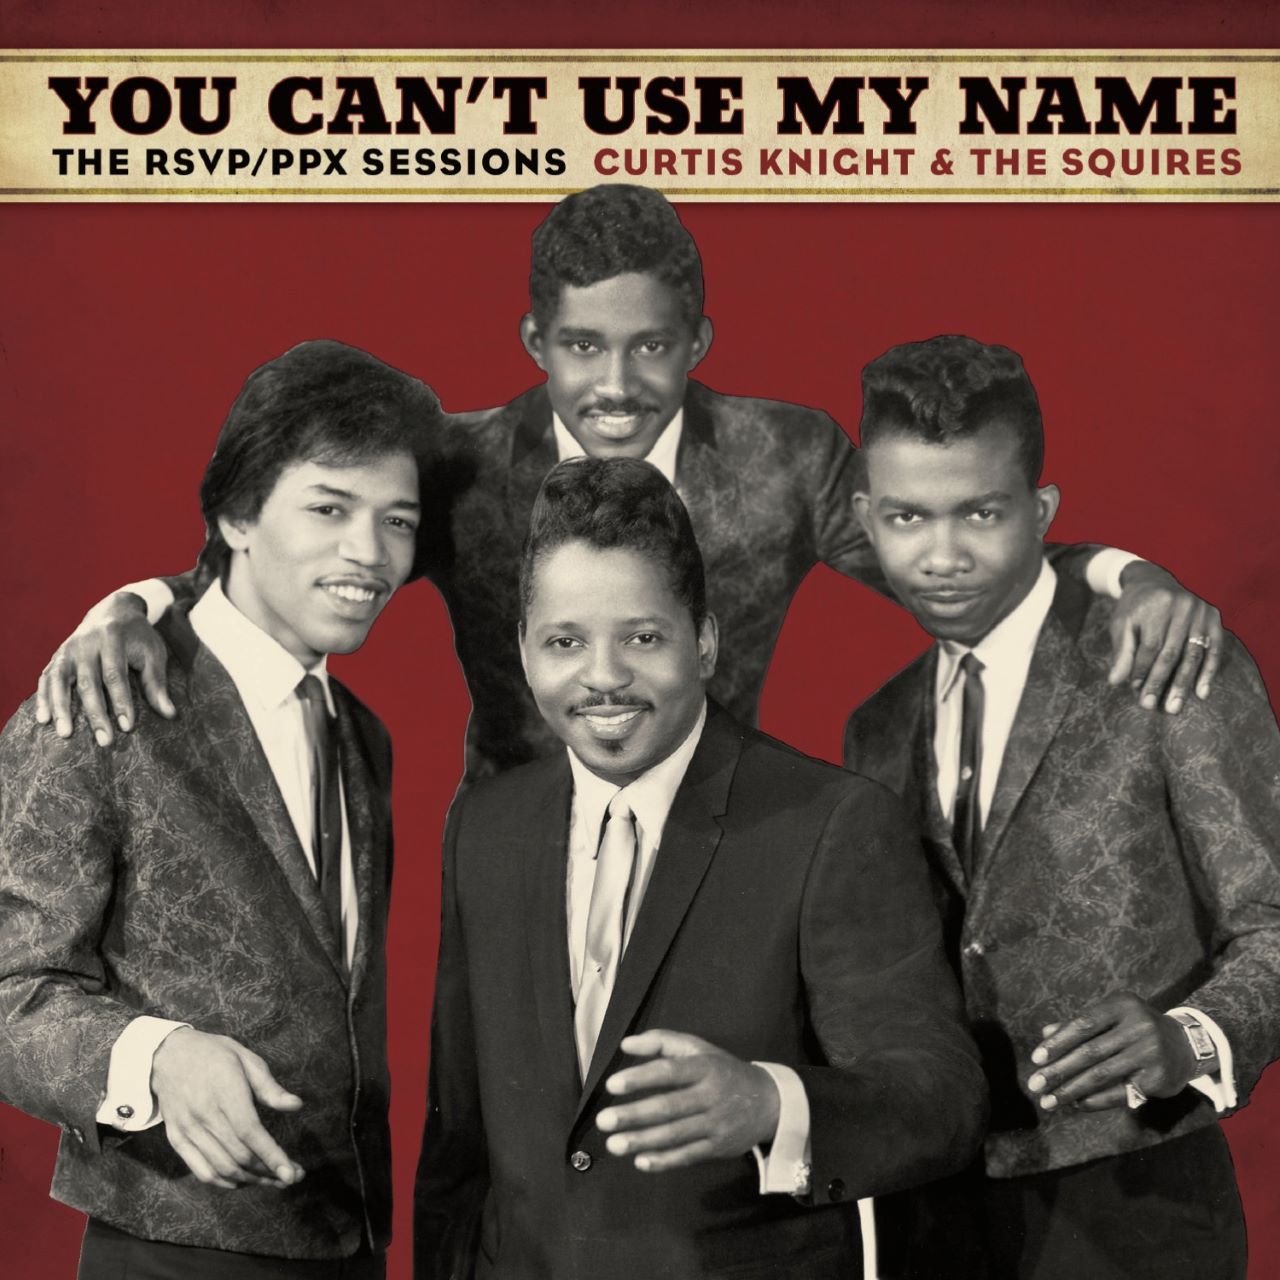 Curtis Knight & The Suires feat. Jimi Hendrix - You Can’t Use My Name cover album